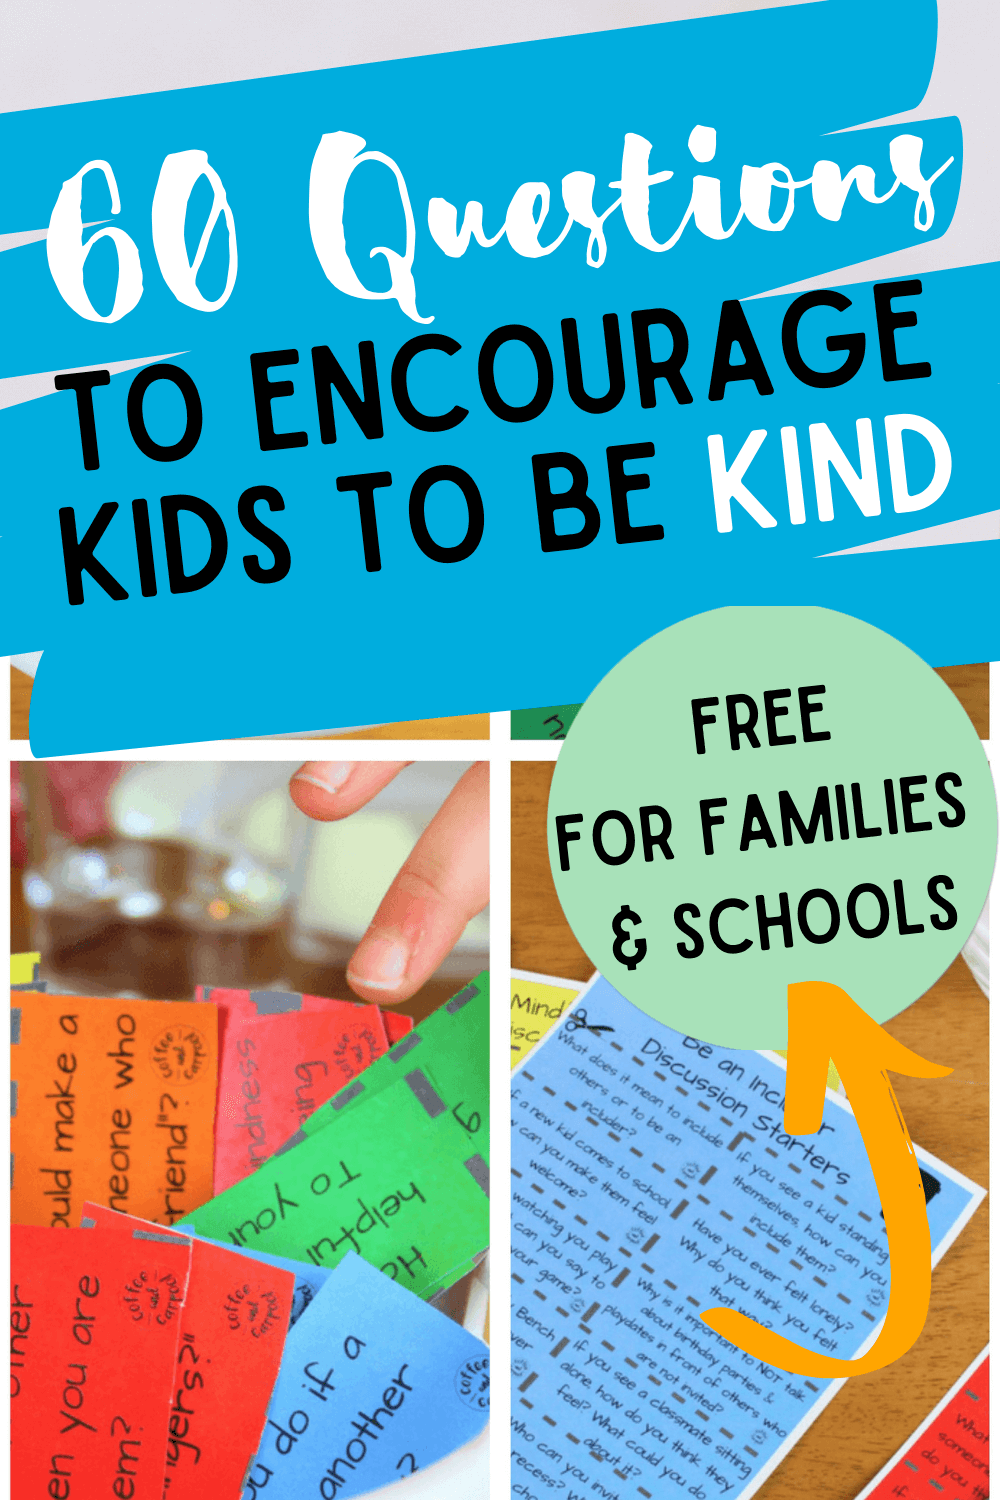 Kindness Discussion Starters to use with your kids to talk about how to be kind #raisingkindkids #raisinghelpers #raisekindkids #kindkids #kidswhoarehelpers #beanincluder #goodfriend #discussionstartes #familydinner #familytime #coffeeandcarpool